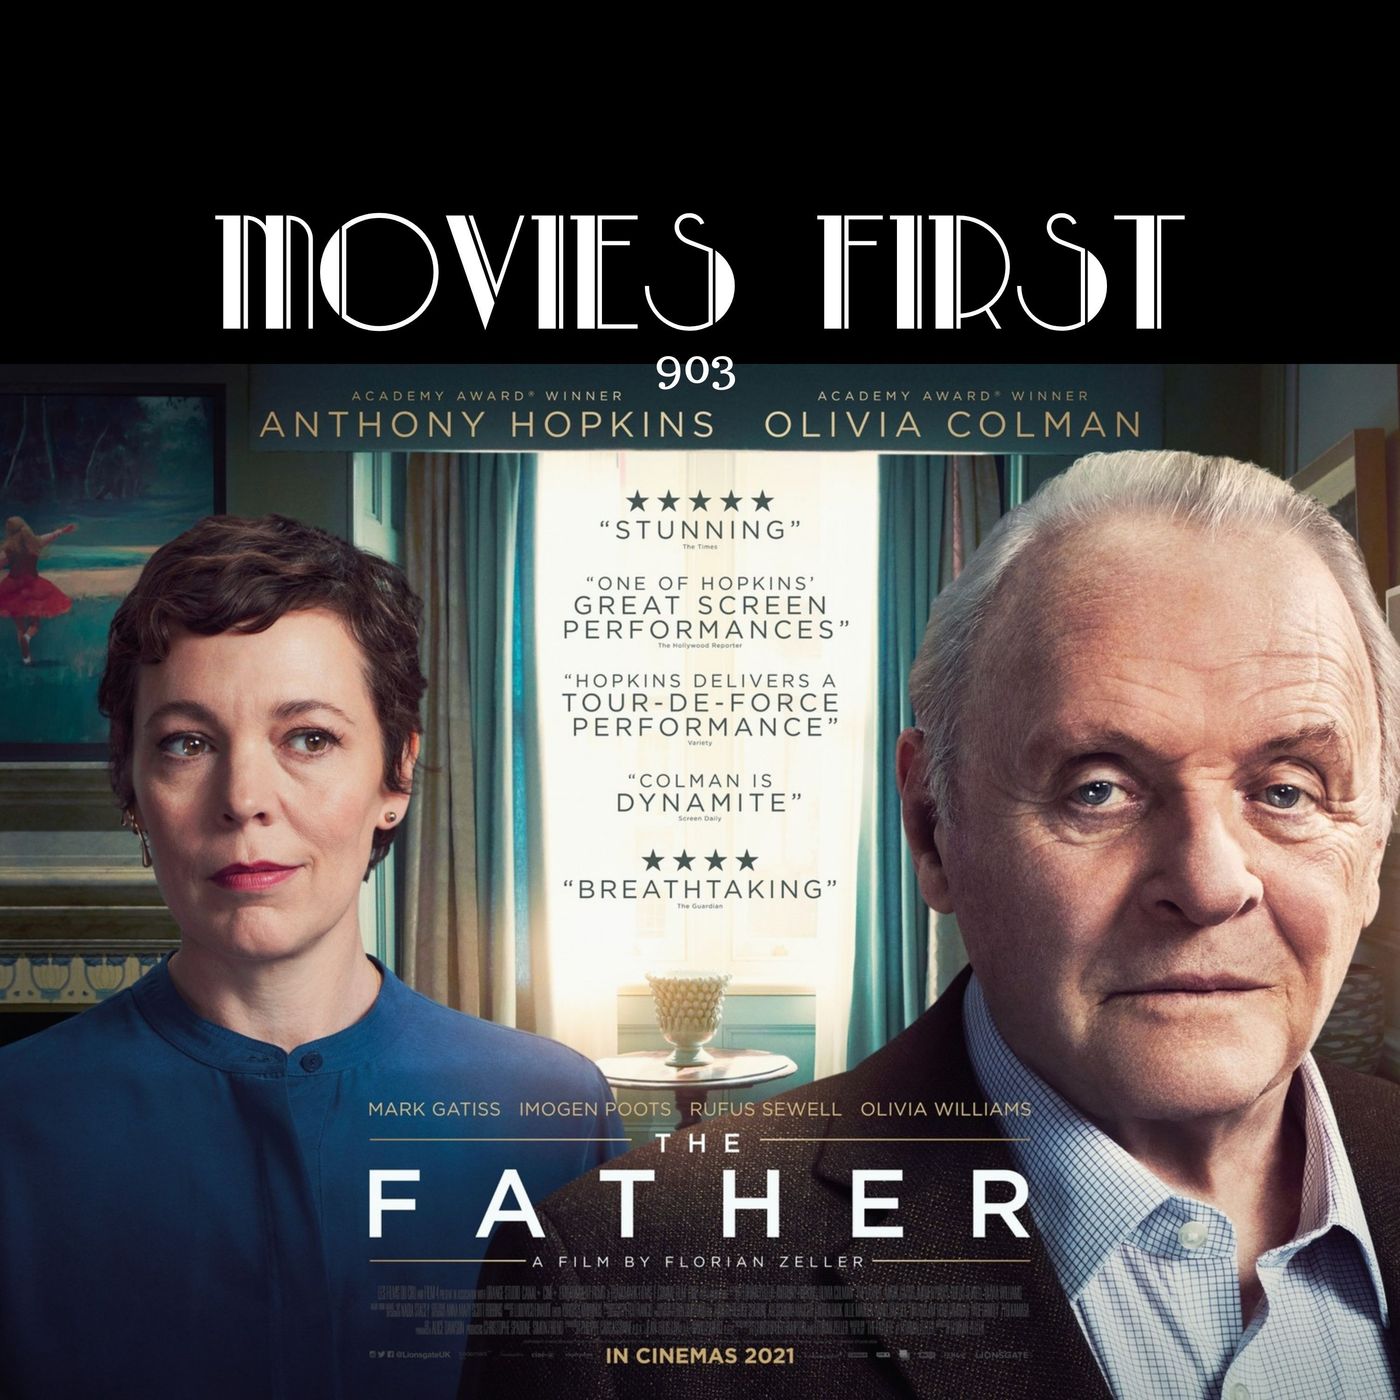 The Father (Drama) (the @MoviesFirst review)